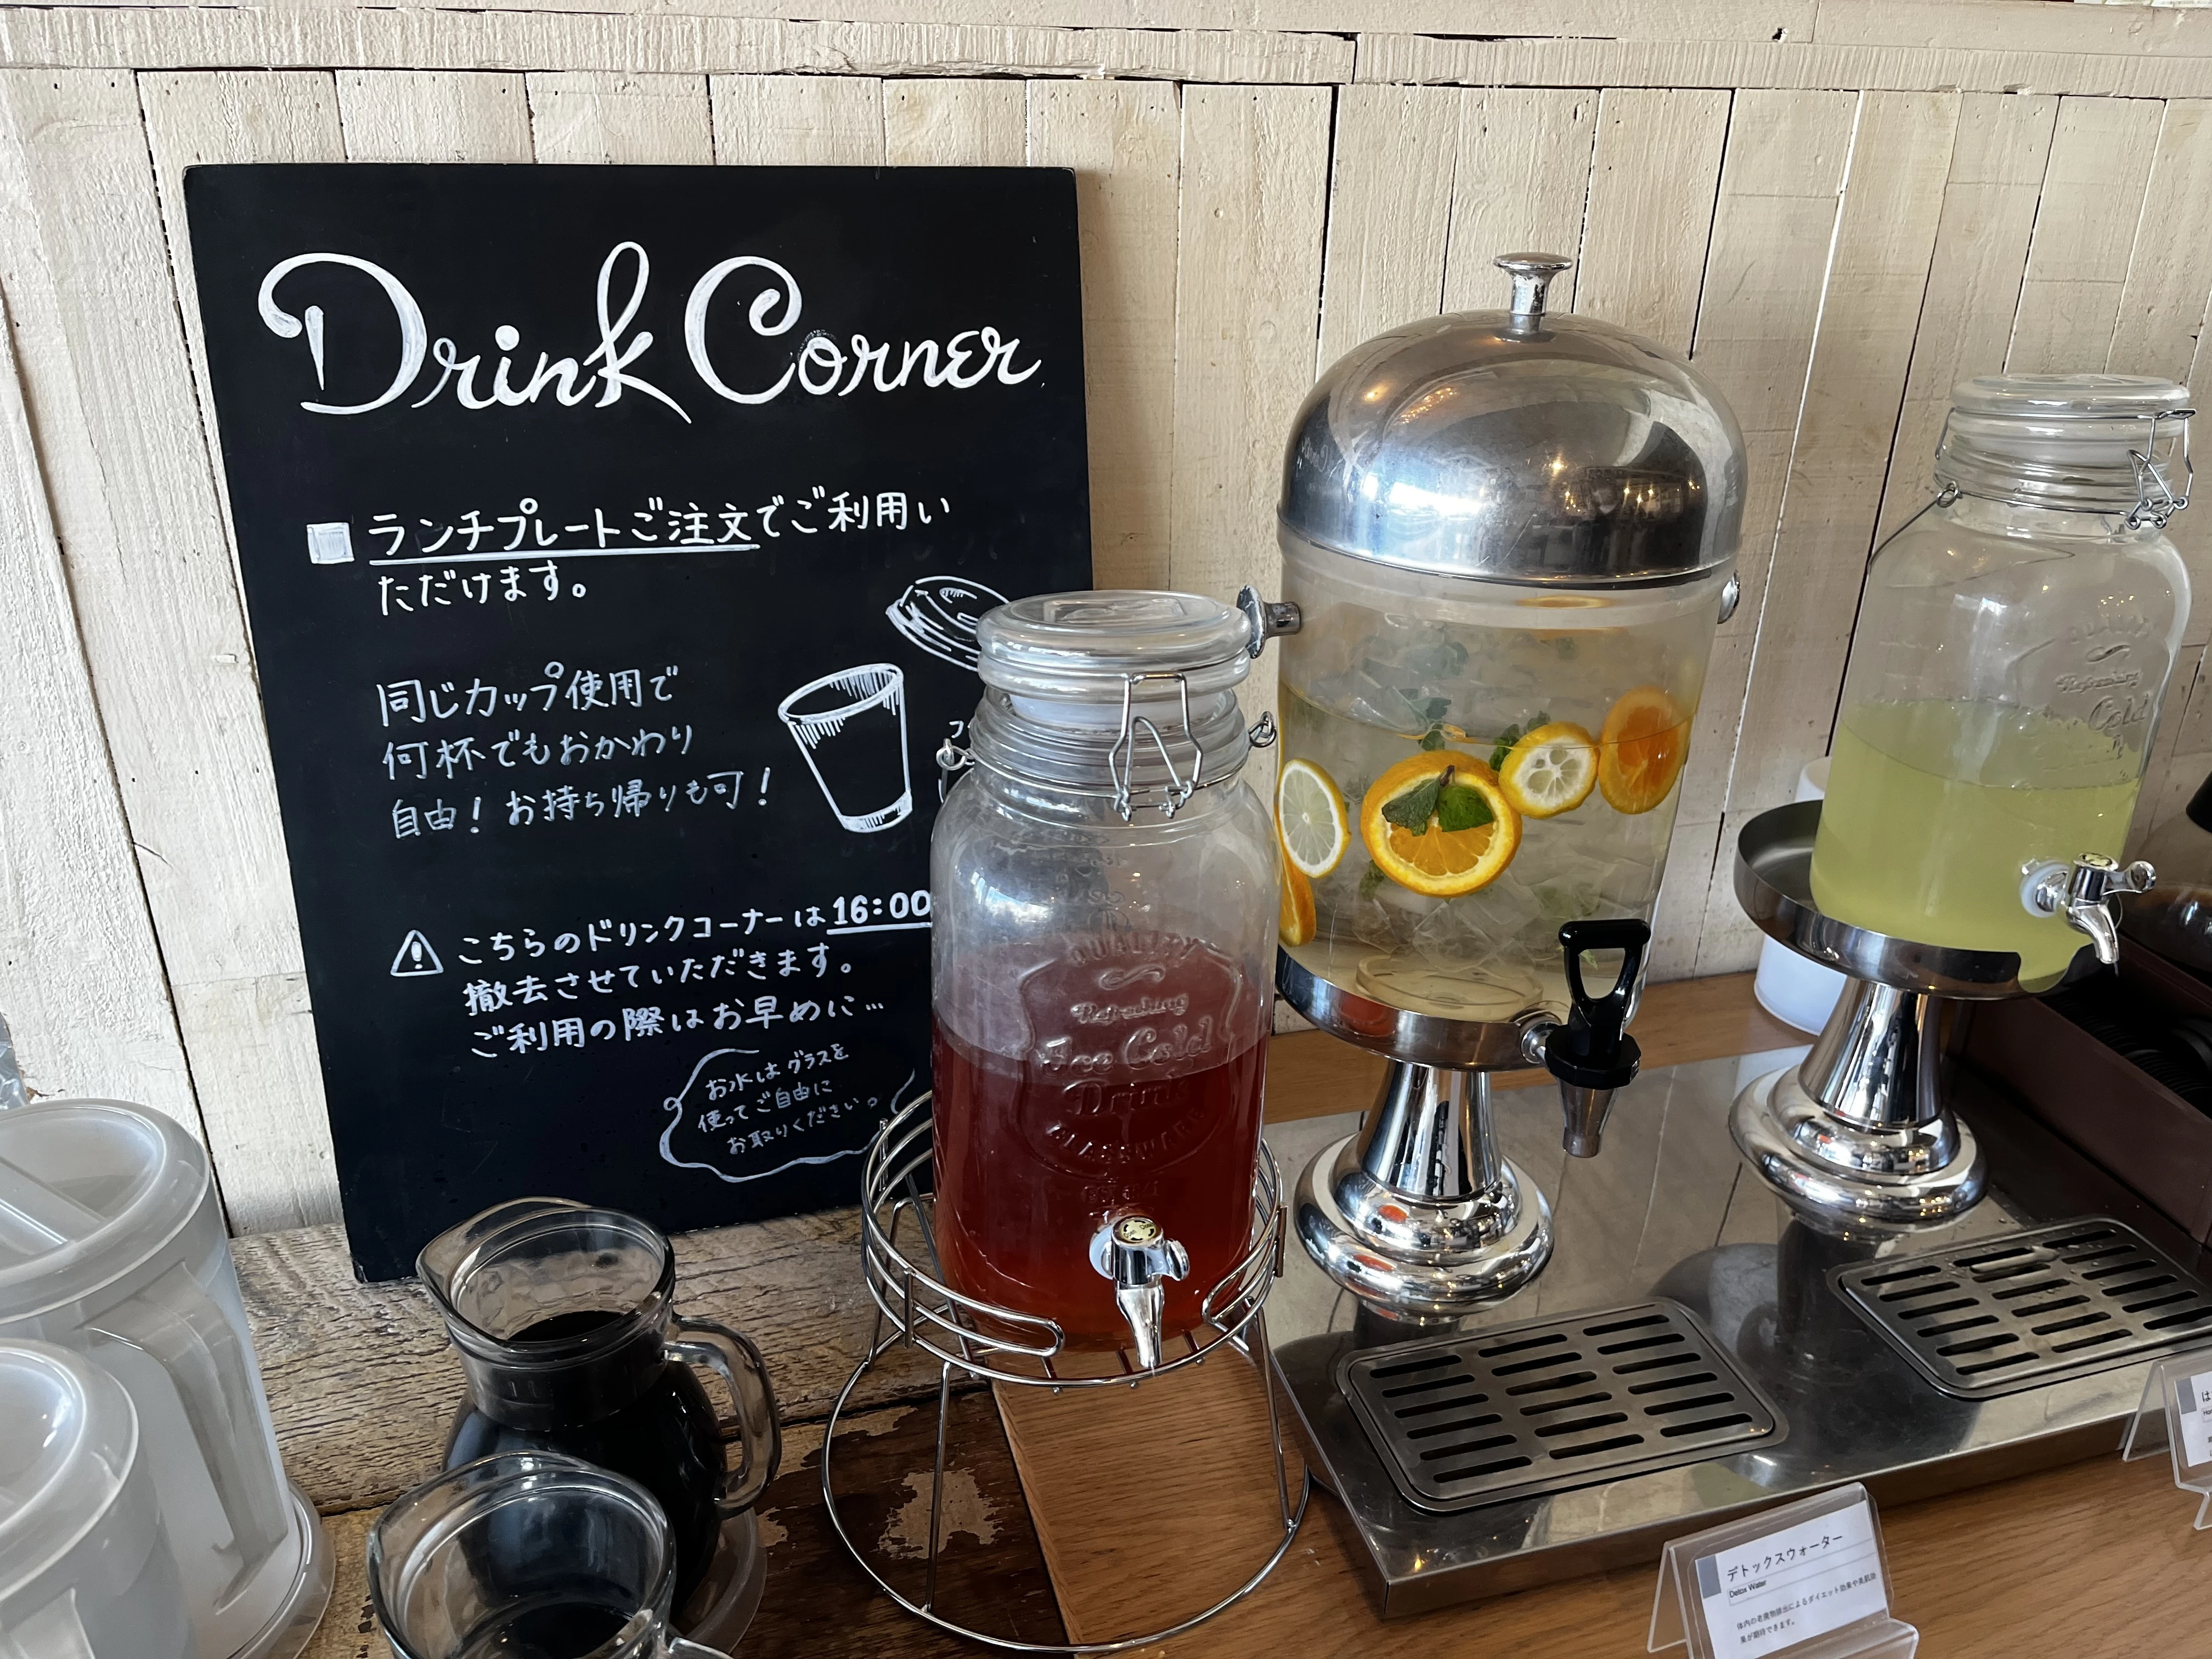 A to Z cafe ドリンクバー